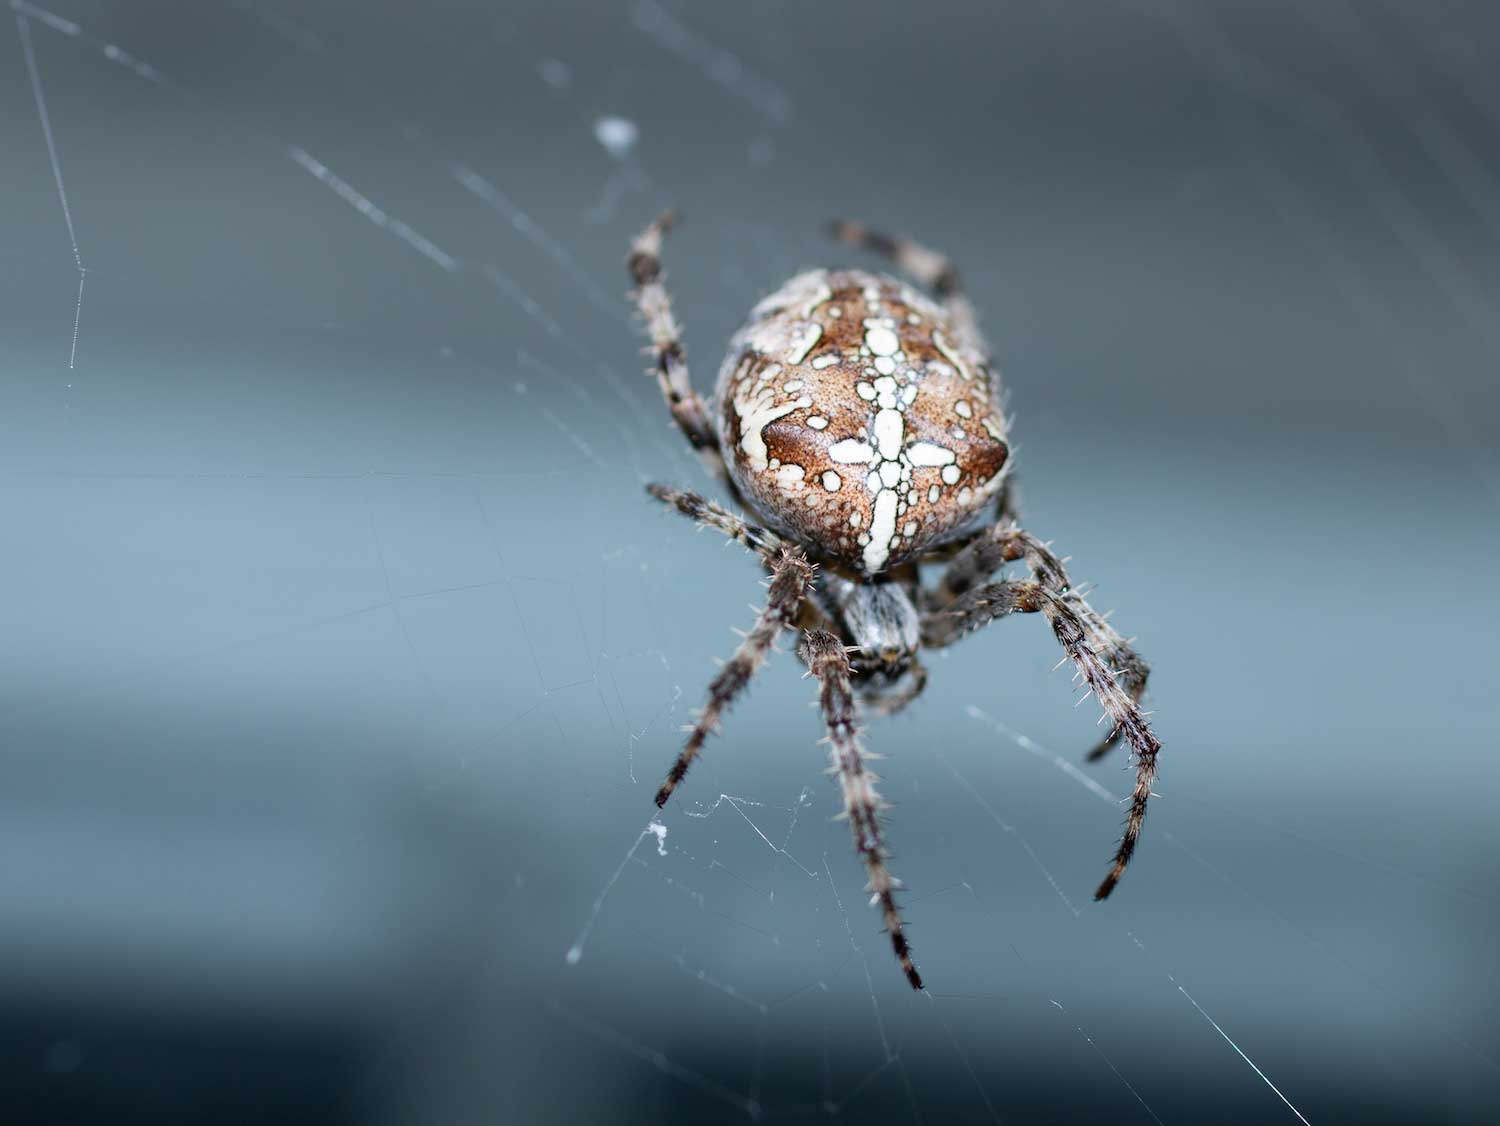 How Do Spiders Catch Their Prey?